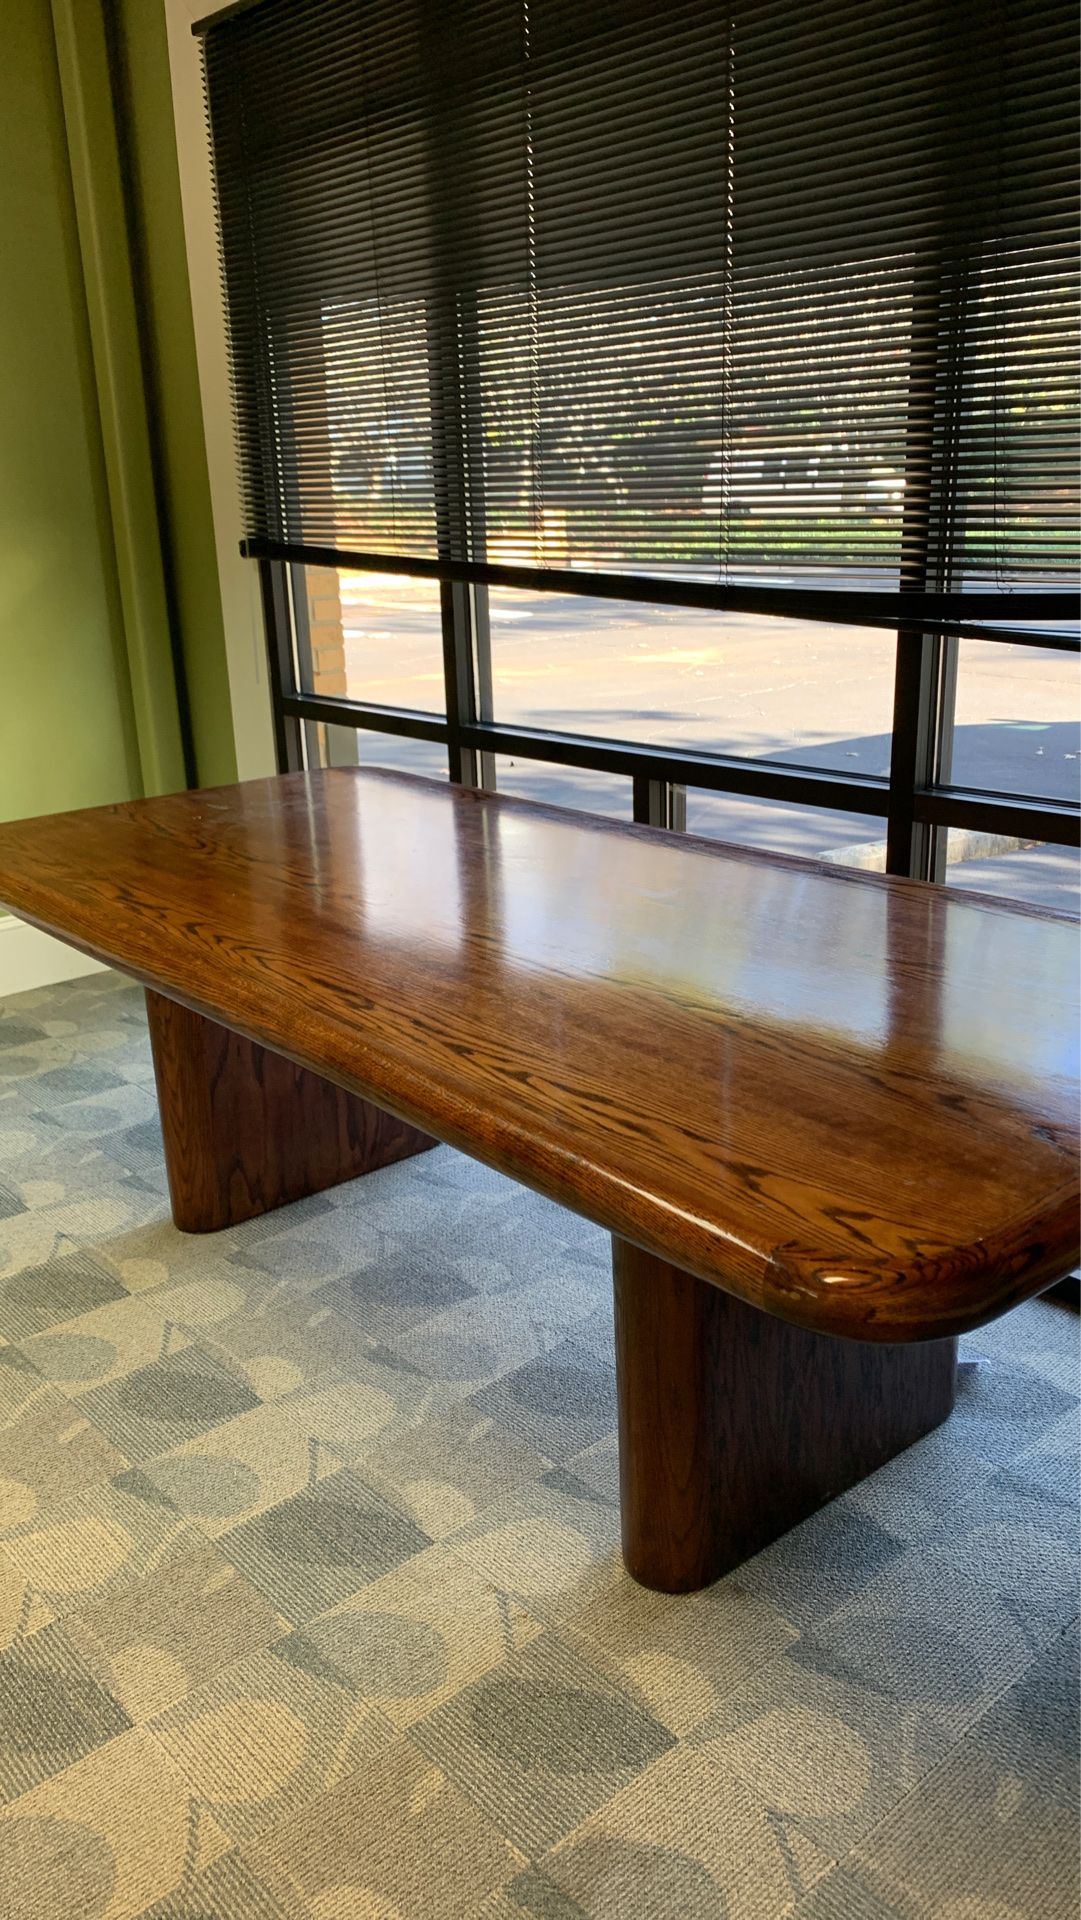 Conference table